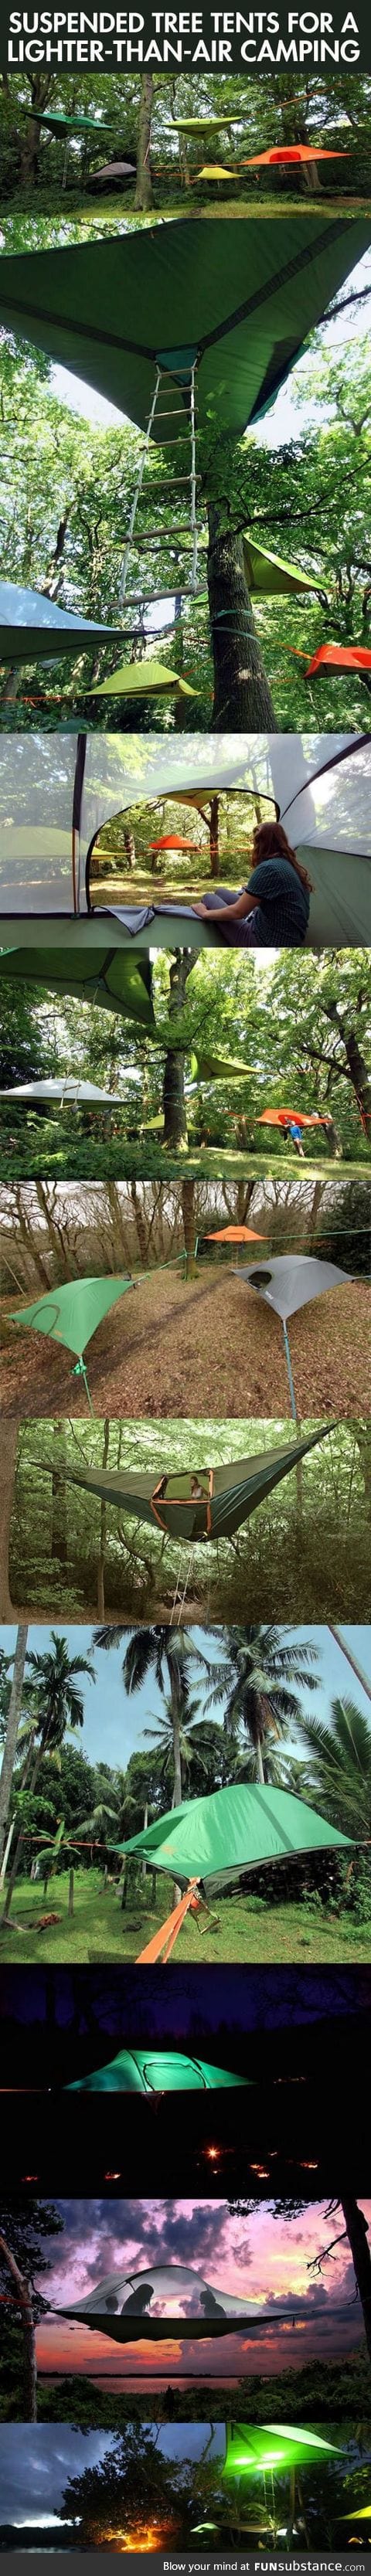 Awesome Tent Concept